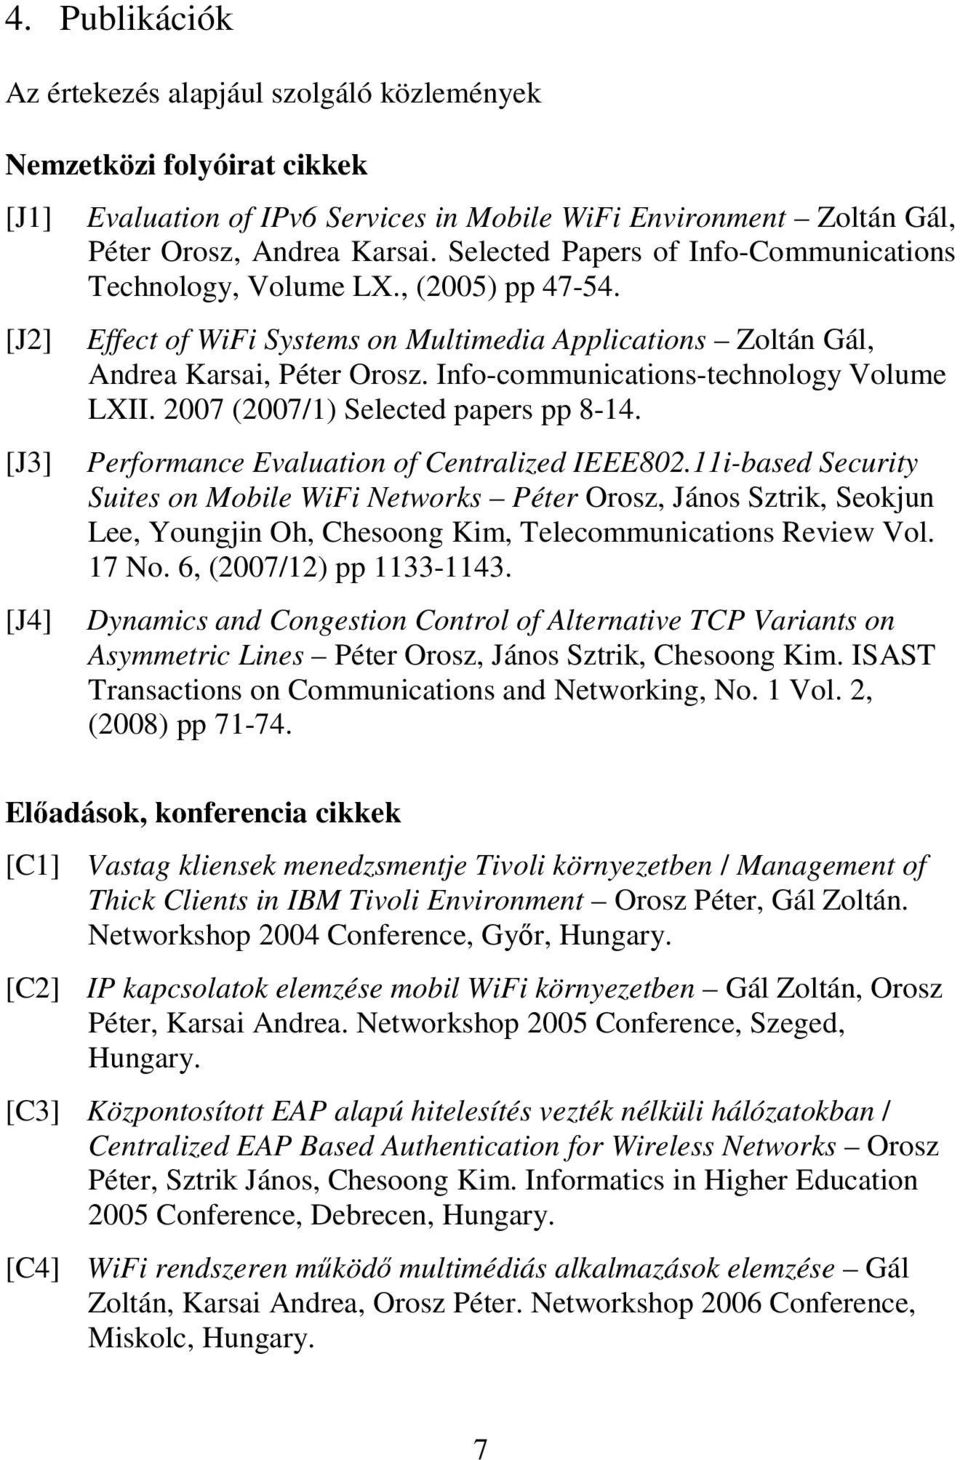 Info-communications-technology Volume LXII. 2007 (2007/1) Selected papers pp 8-14. Performance Evaluation of Centralized IEEE802.